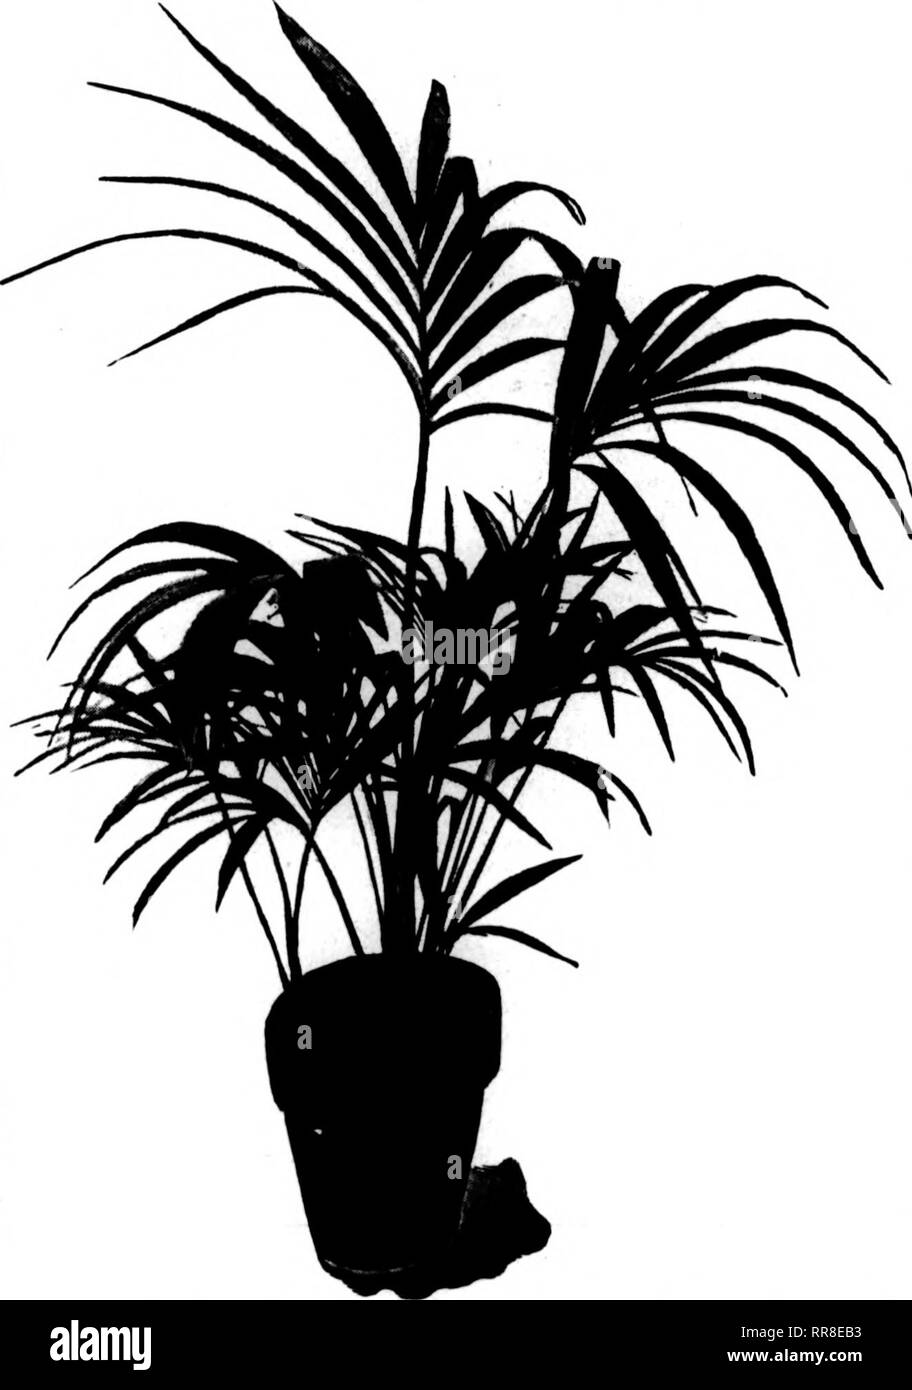 . Florists' review [microform]. Floriculture. 12 The Florists^ Review Jui.v 13, 1922 PALMS Large Decorative Plants—Also Small Sizes to Grow On Our large stock of Palms is in prize-winning condition. Every plant is absolutely clean and perfectly developed. KENTIA BELMOREANA Size Inches Pot Leaves High Per 100 2-in. 3 to 4 7 to 10 $15.00 3-in. 5 to 6 9 to 12 25.00 Each 4-in. 5 to 7 12 to 16 $ 0.75 5-in. 6 to 7 14 to 20 $1.00 to 1.50 6-in. 6 to 7 18 to 24 3.00 7-in., made up, 3 in a pot, 18 to 24 inches high 4.00 7-in., in tubs, made up, 24 to 30 inches high, specimens 6.00 8-in., in tubs, made u Stock Photo